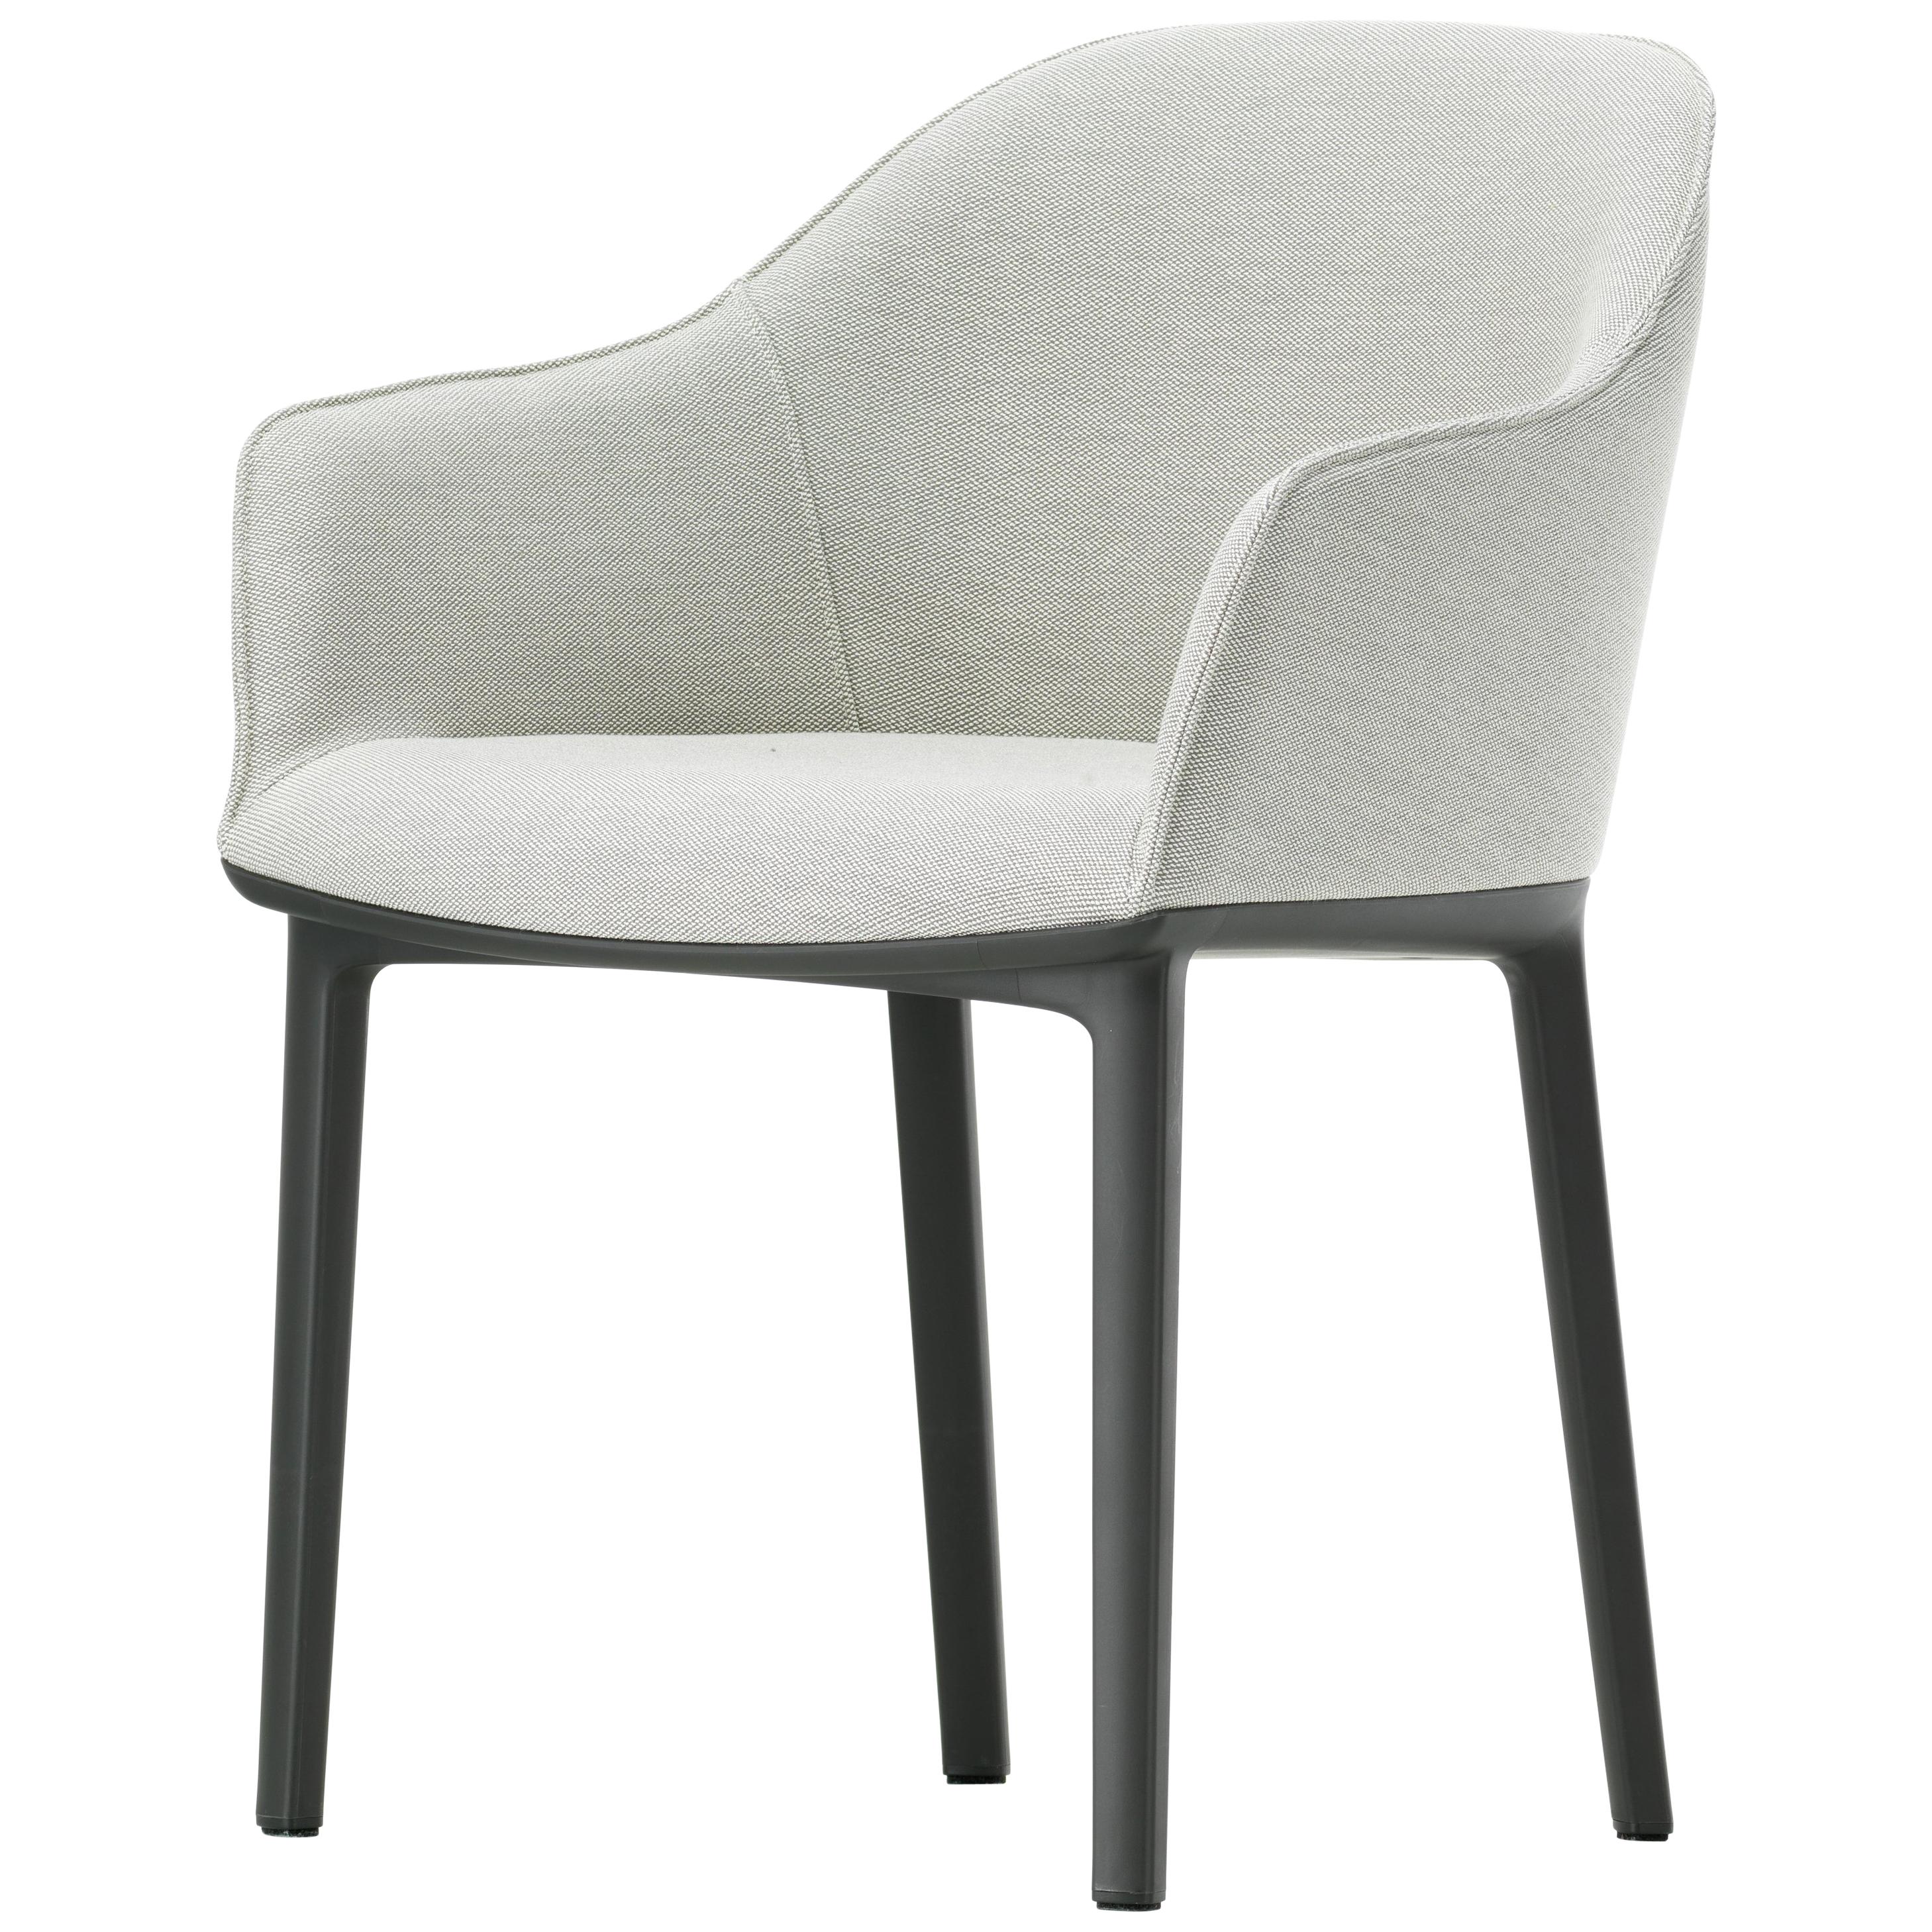 Vitra Softshell Chair in Cream White & Grey Plano by Ronan & Erwan Bouroullec For Sale